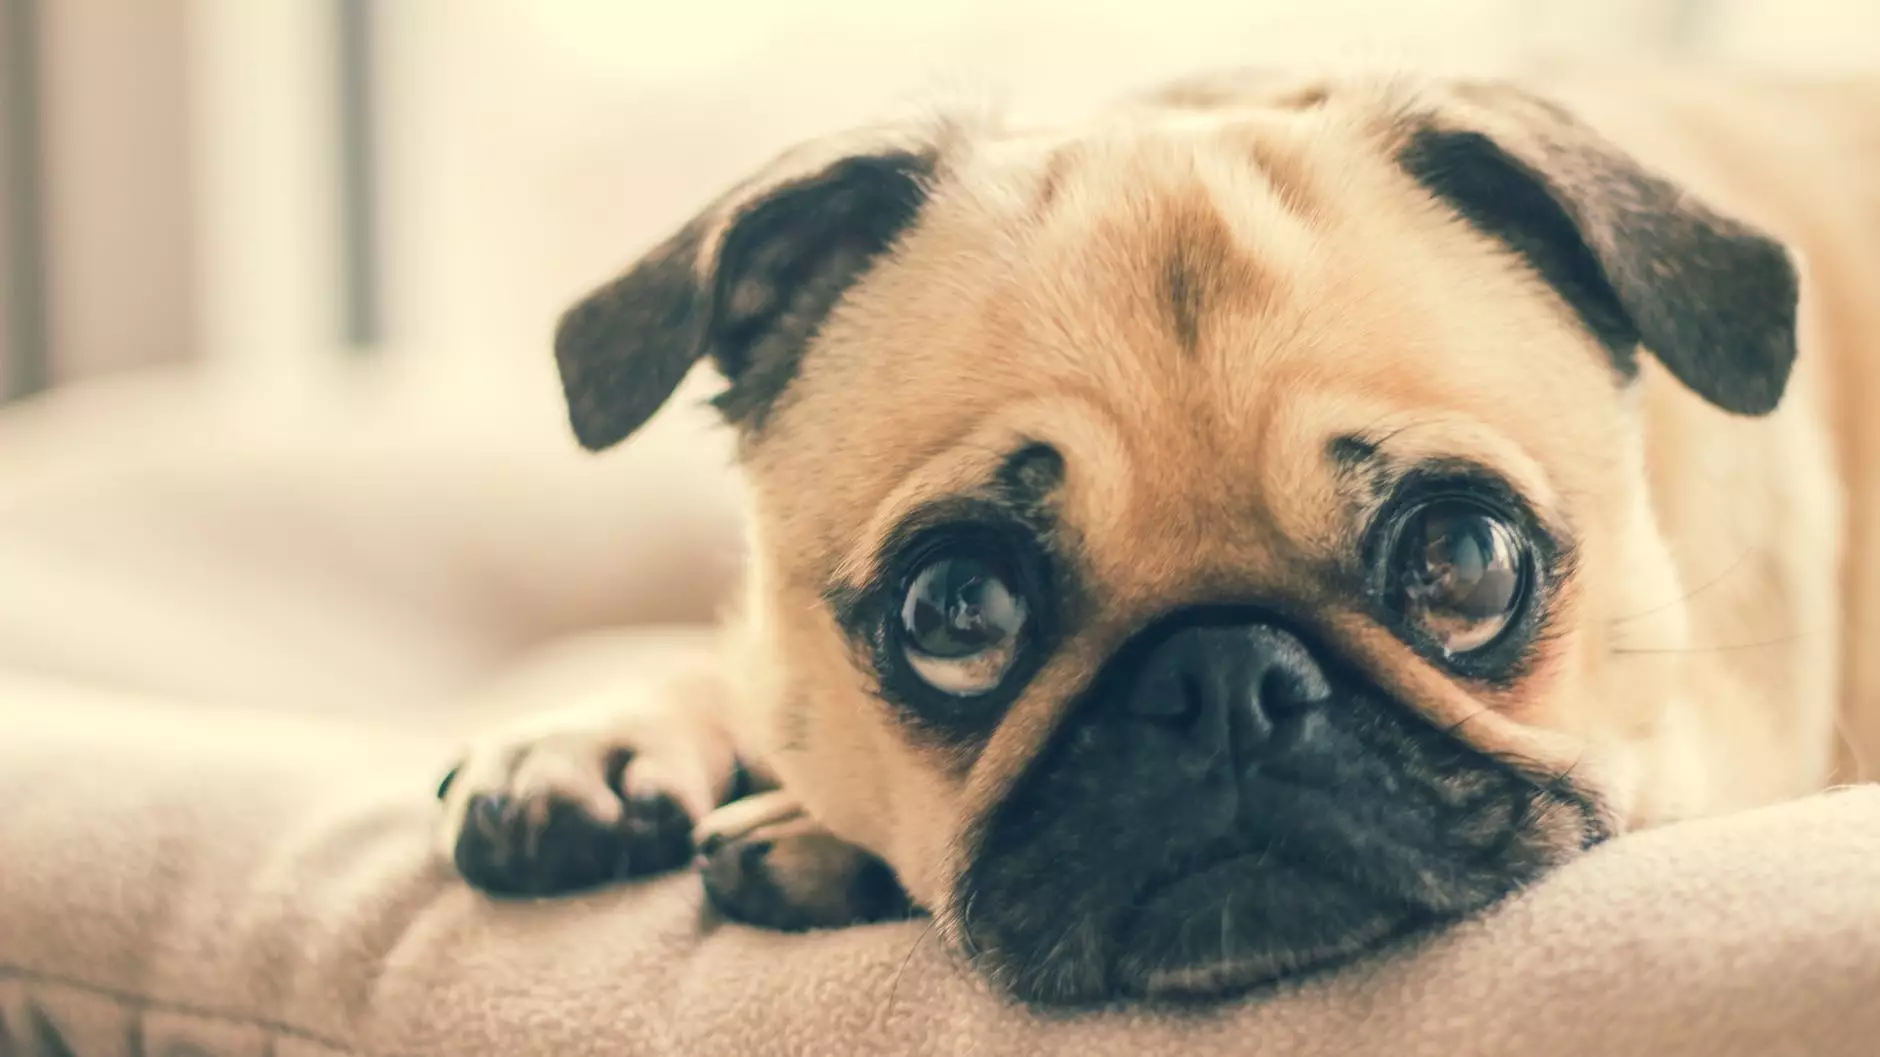 There's A Scientific Reason We Want To 'Eat' Cute Puppies